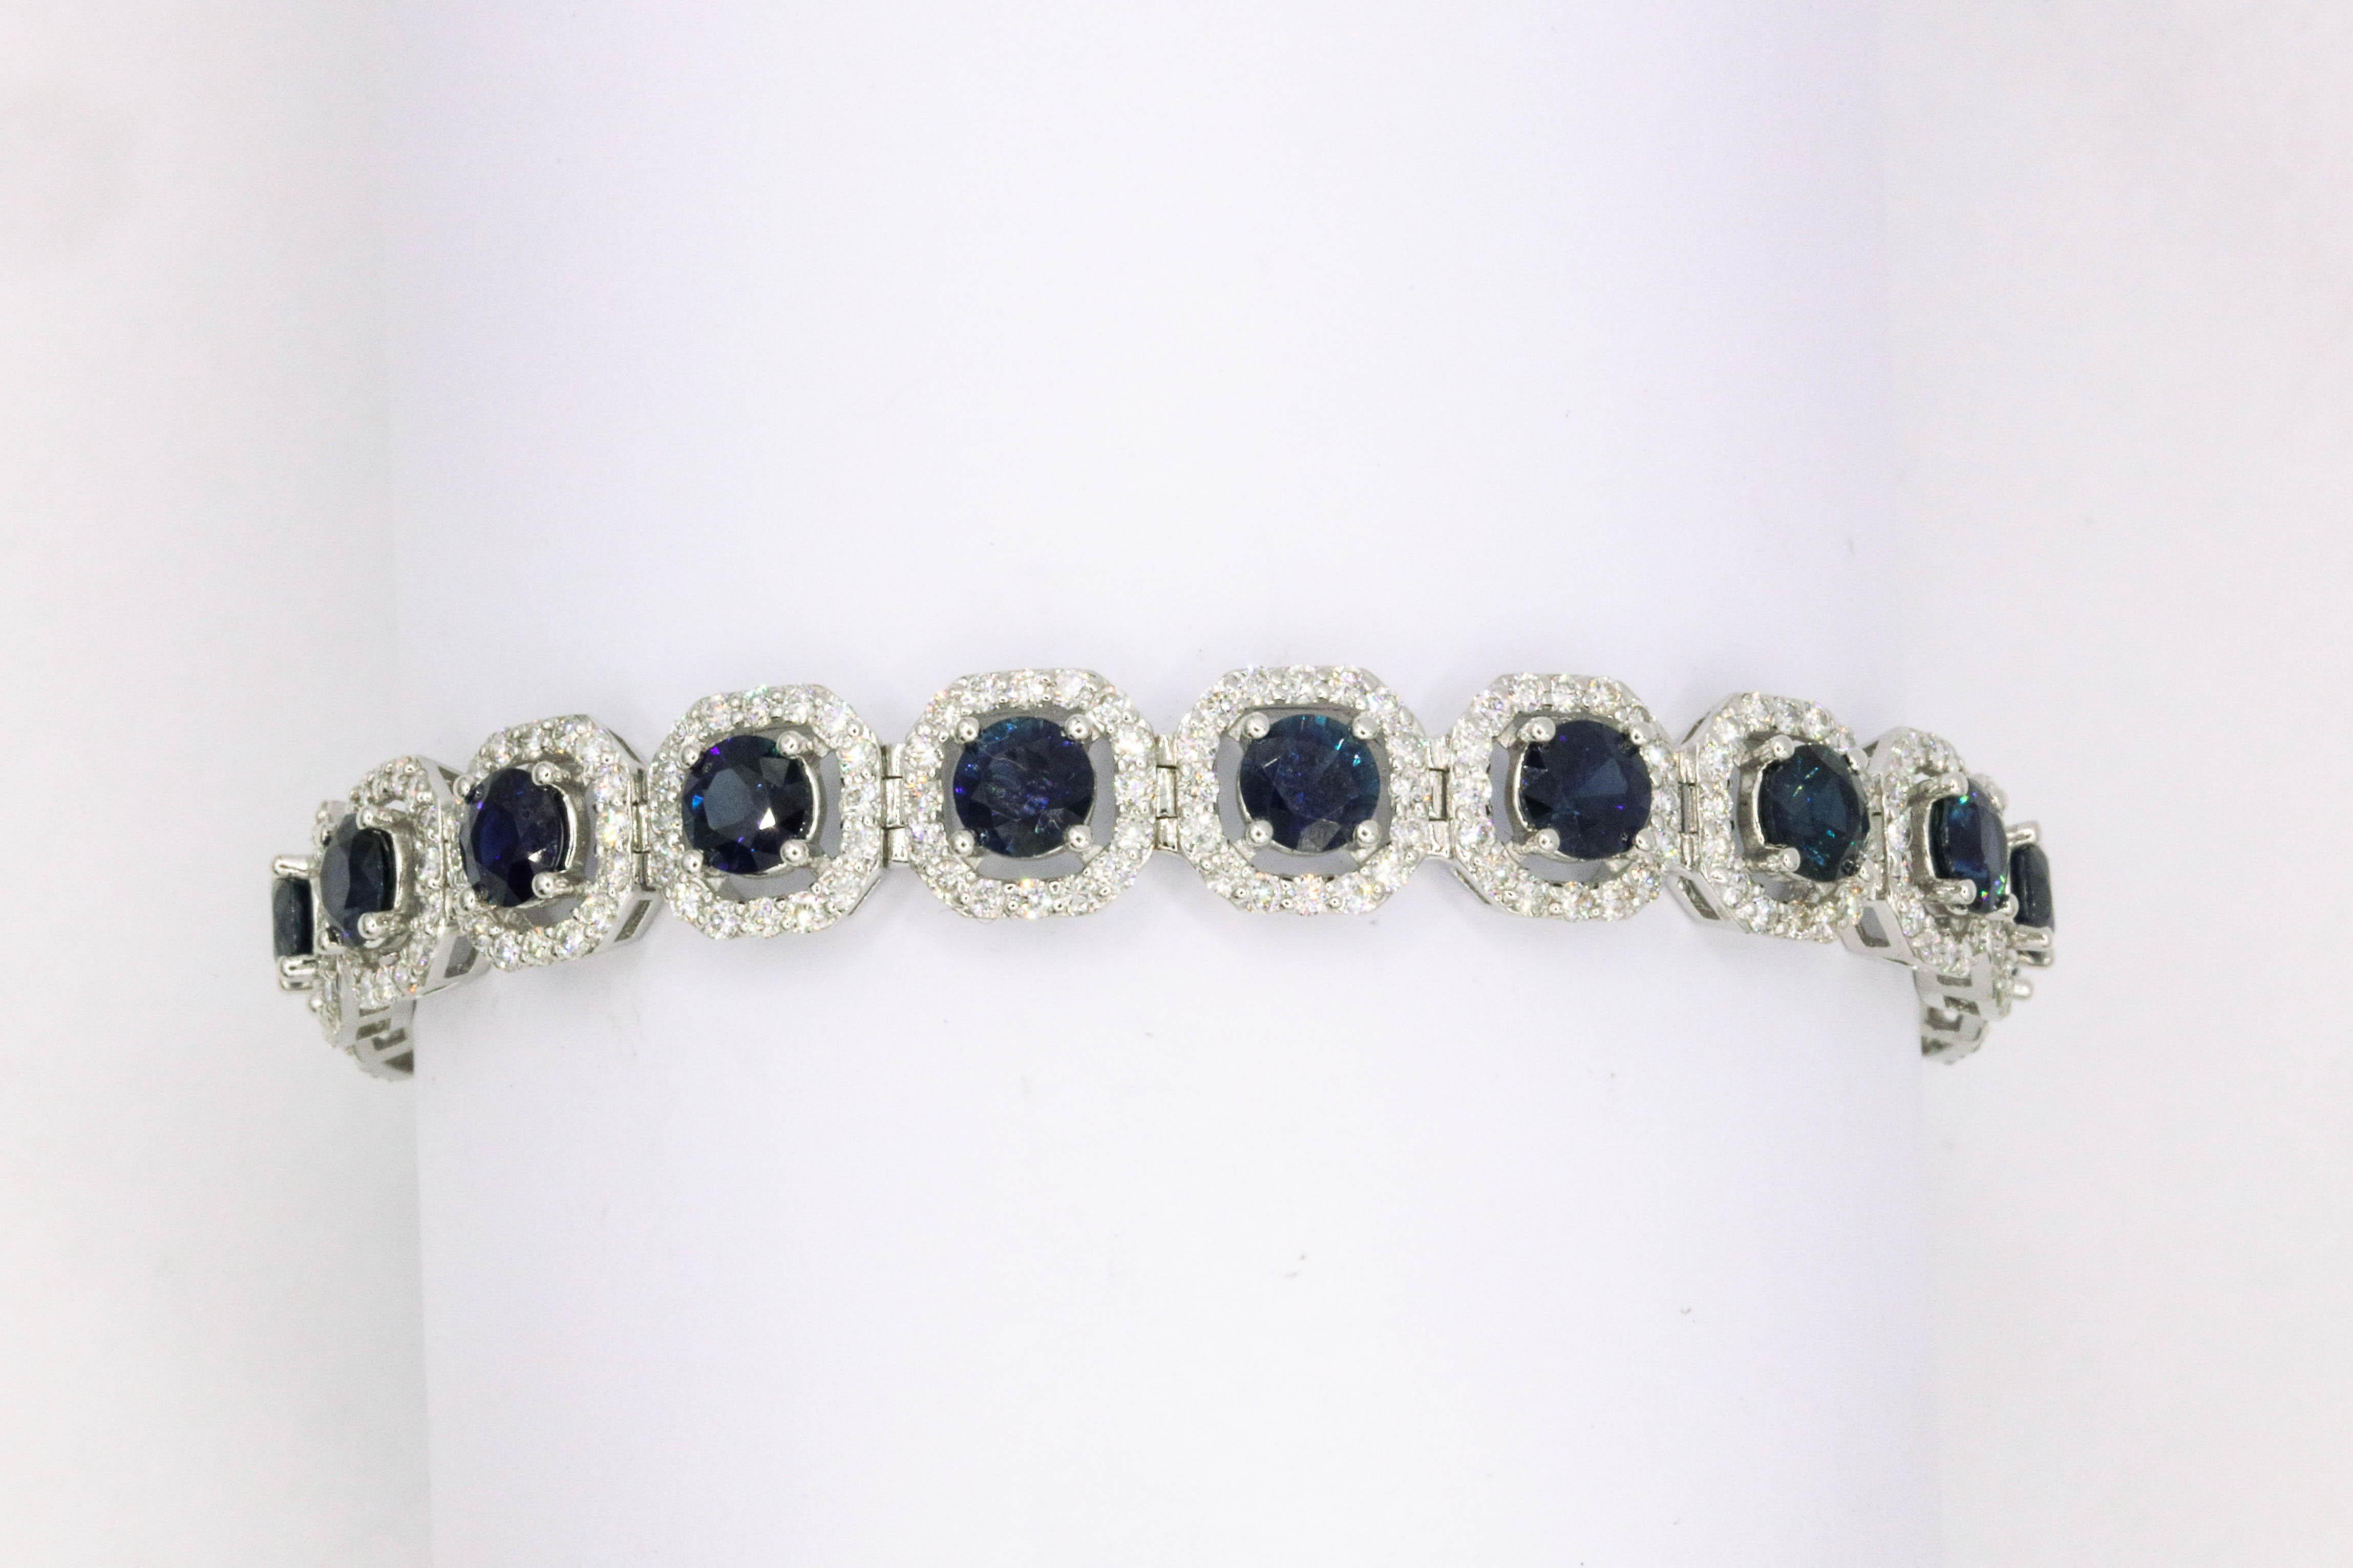 Nineteen round sapphires weighing 10.02 carats flanked with 304 round brilliants weighing 3.90 carats in 18k white gold. 